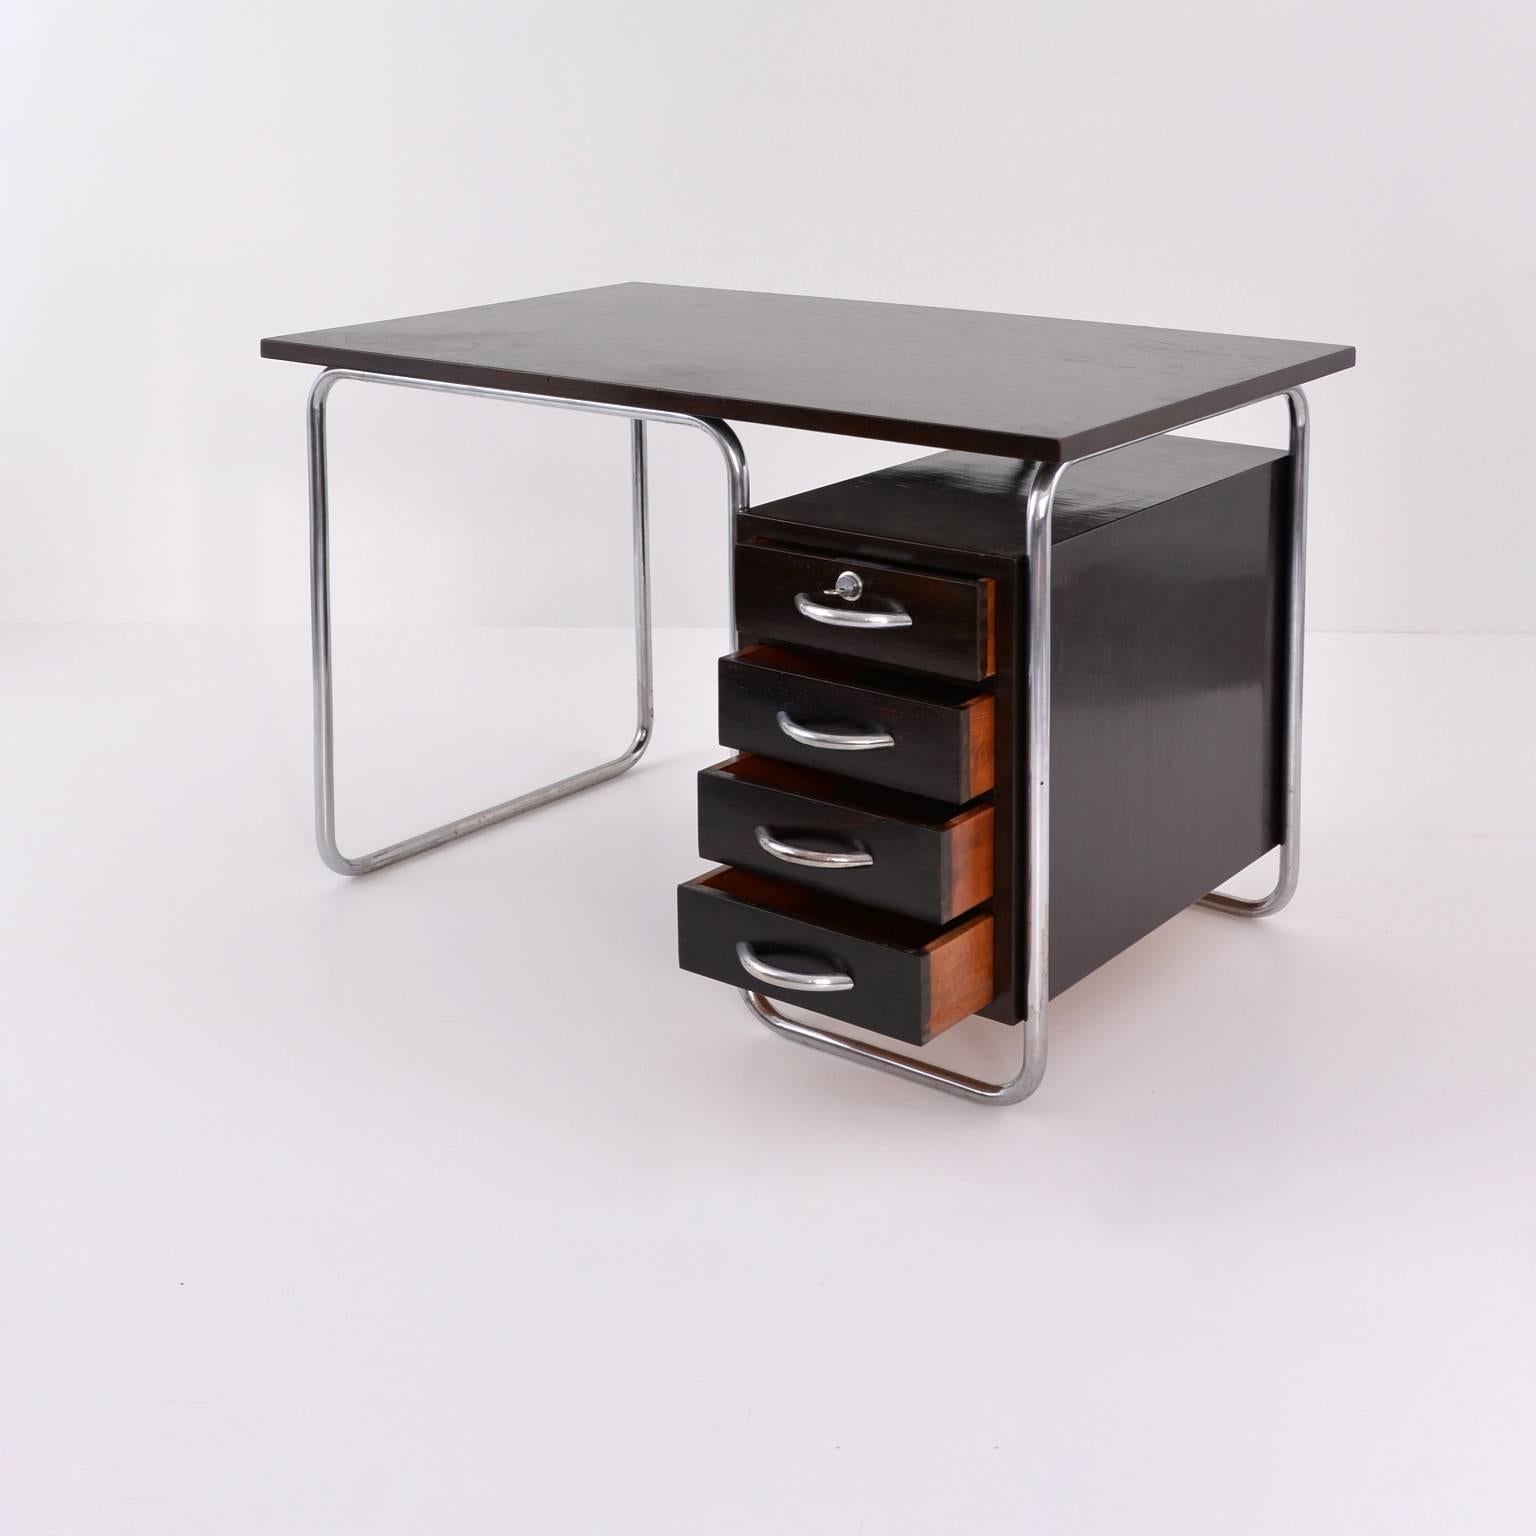 Czech Modernist Tubular Steel and Stained Wood Desk by Rudolf Vichr, Prague, 1930